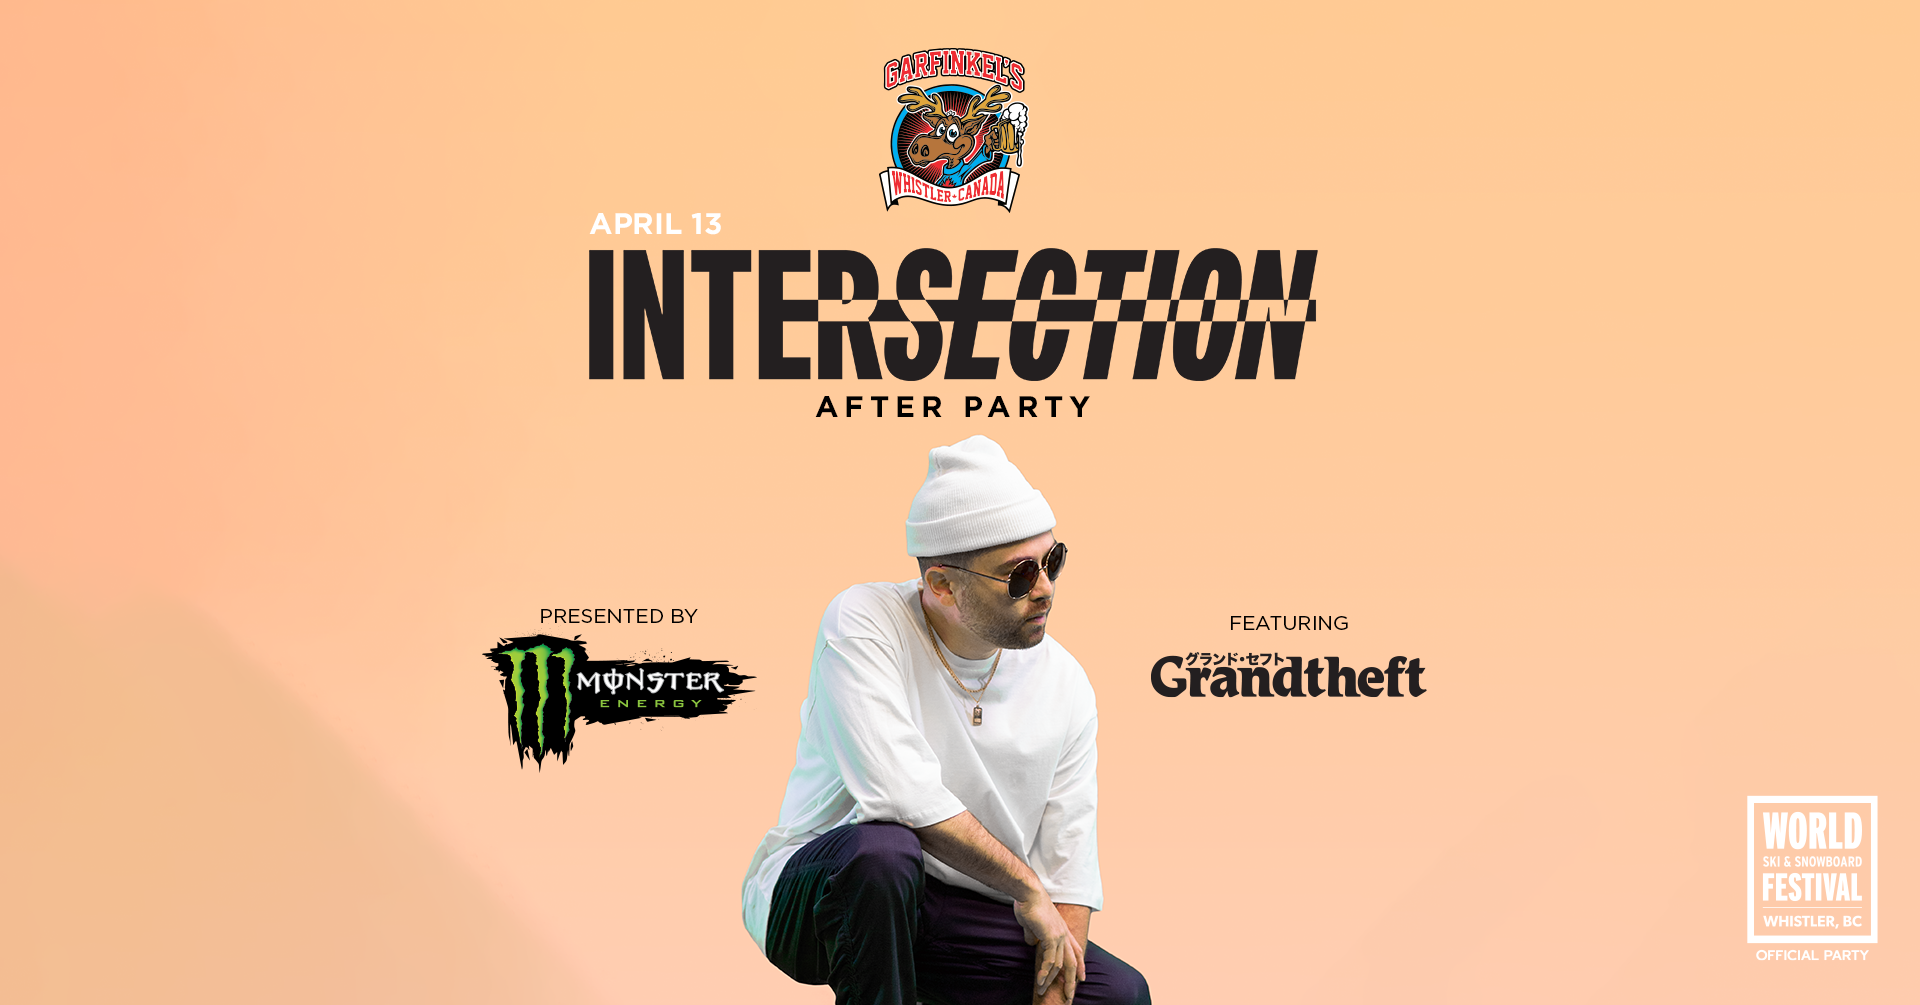 Intersection After Party, presented by Monster, featuring Grandtheft